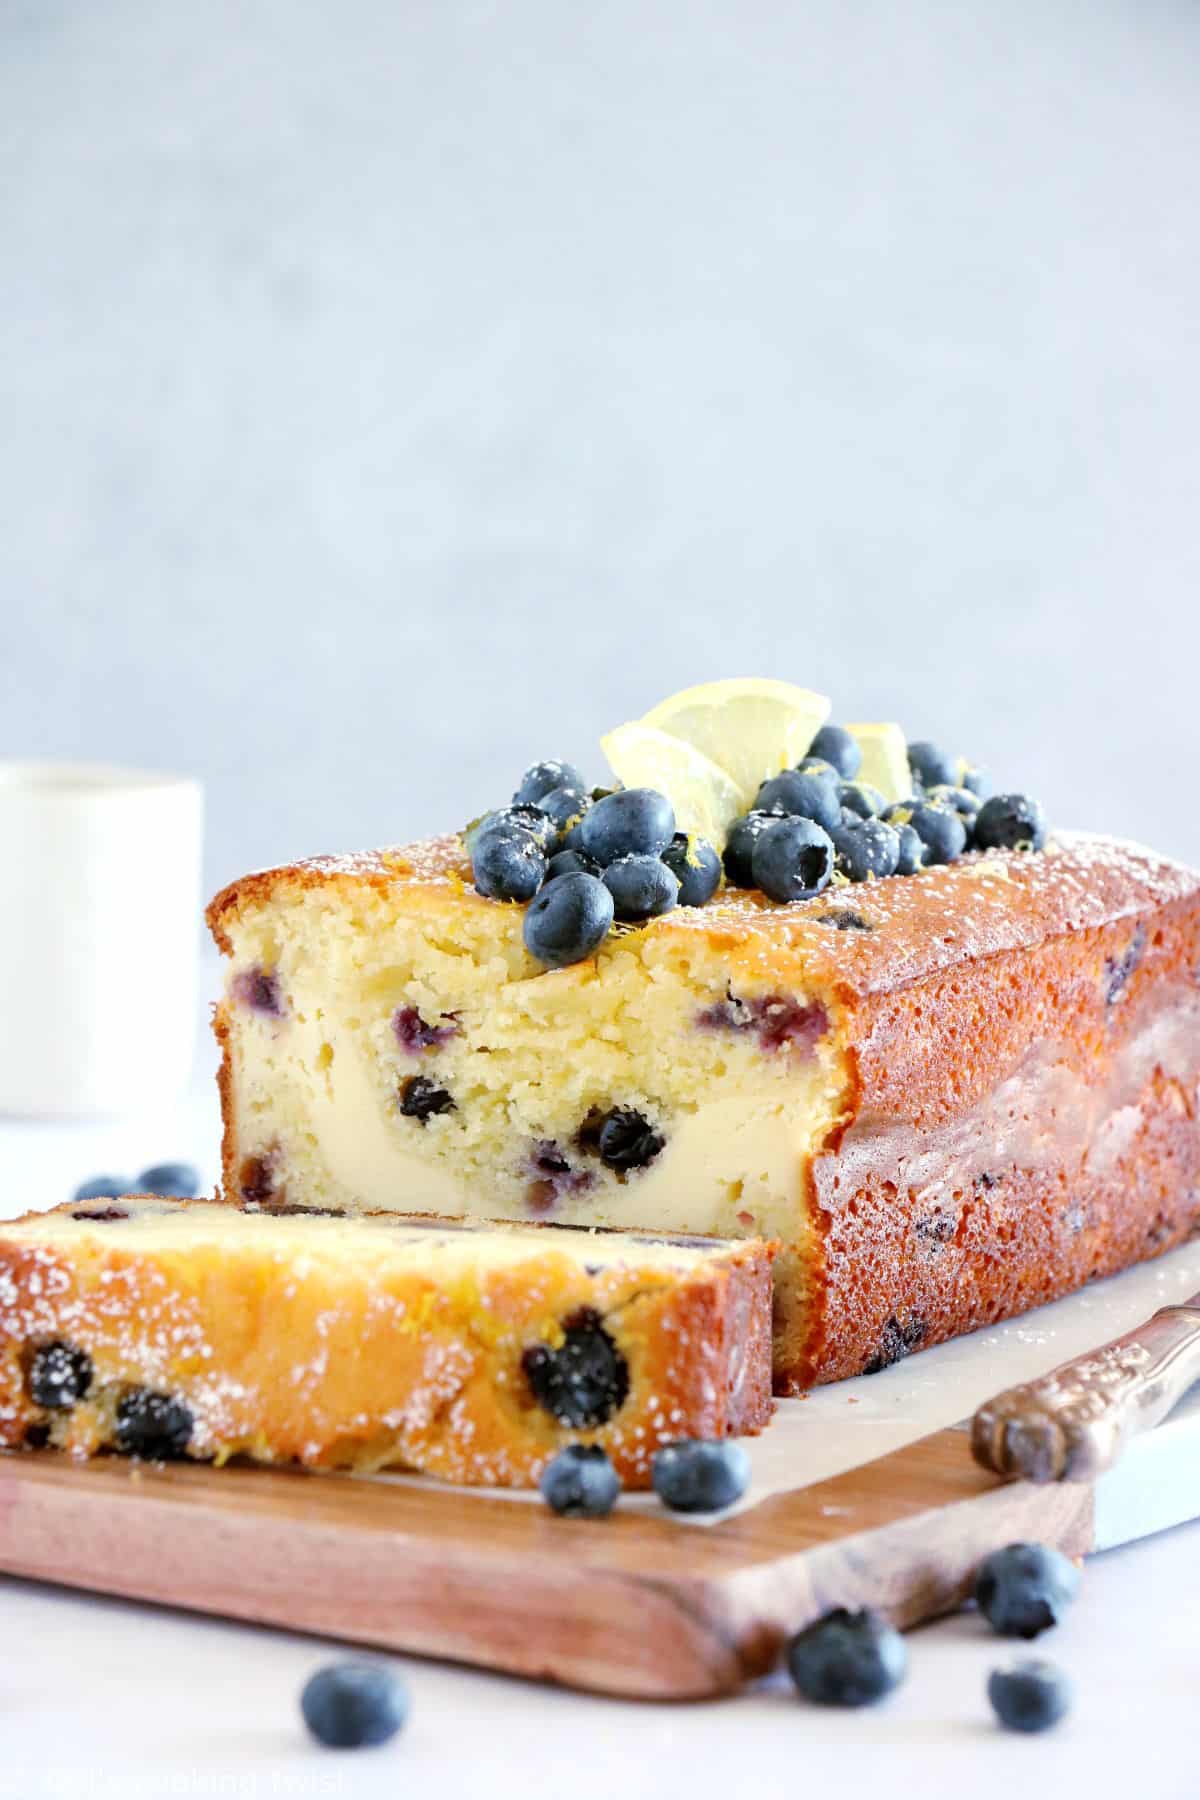 This cream cheese-filled lemon blueberry loaf is bursting with juicy blueberries and lemony flavors with a soft, tender crumb, and a very refreshing cream cheese center.